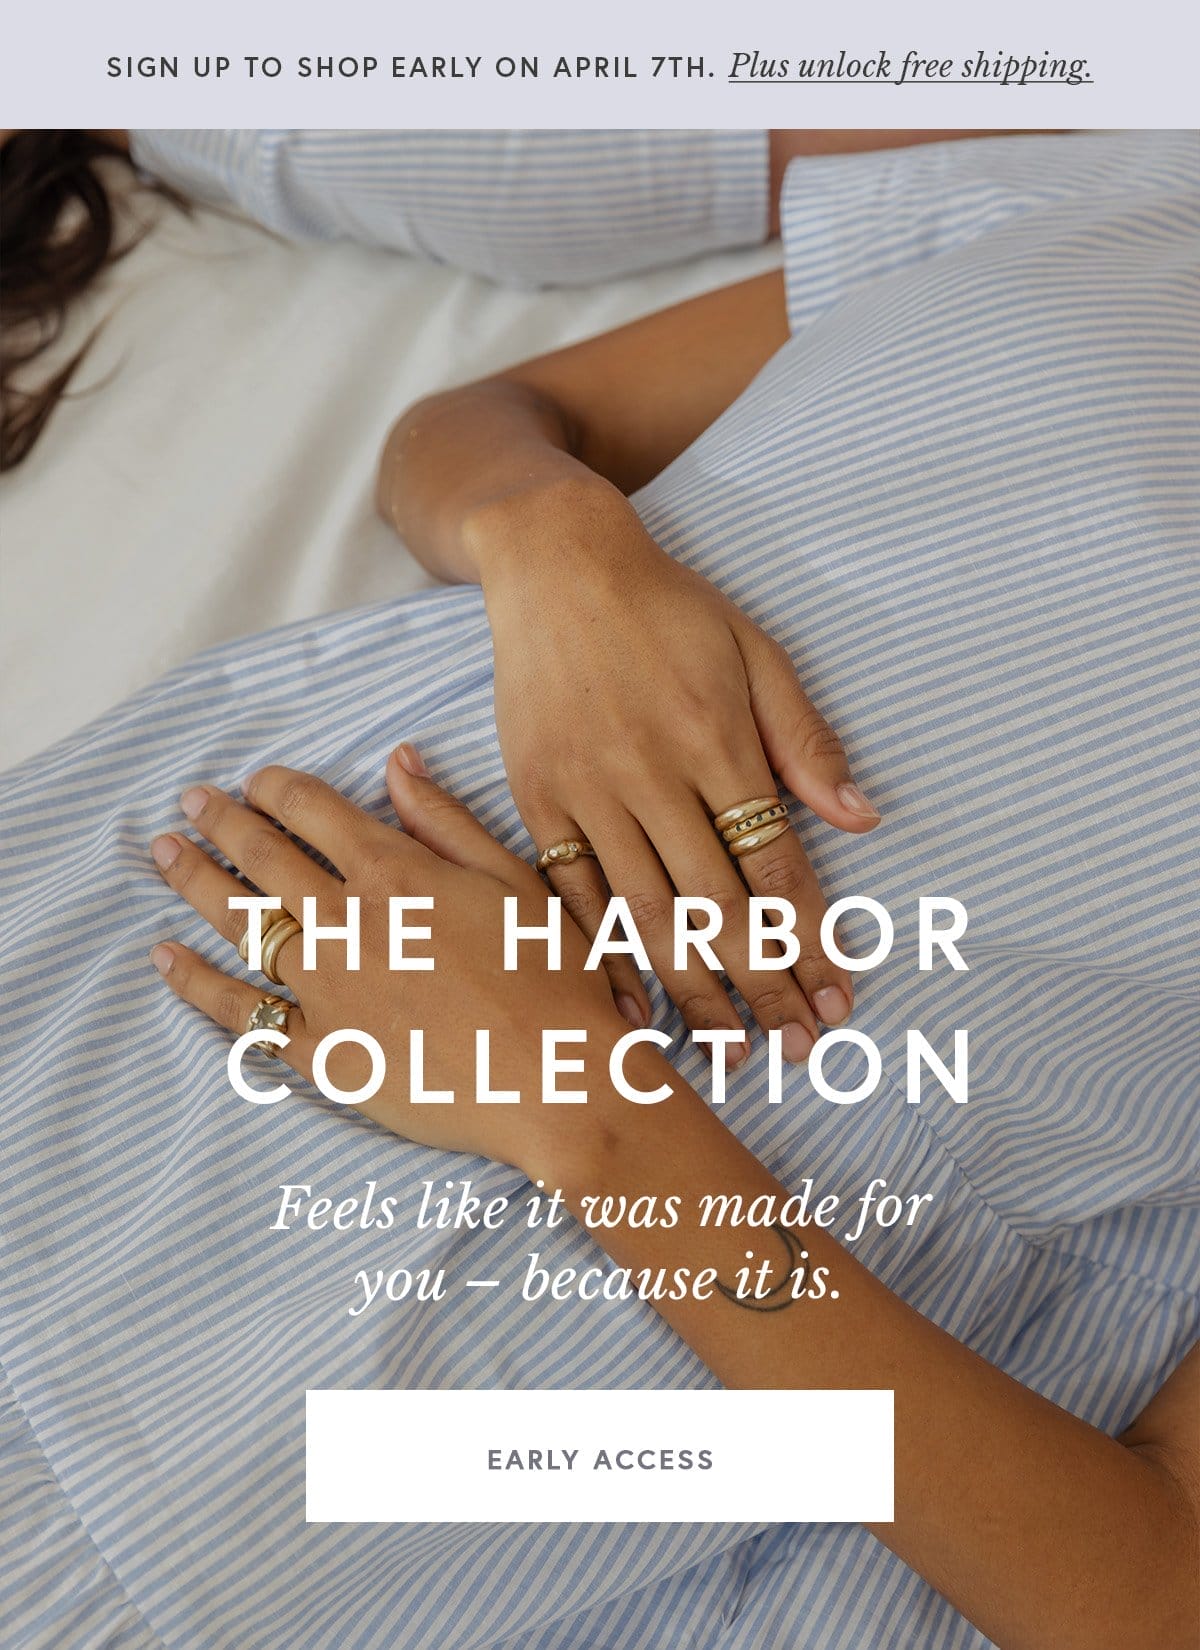 The Harbor Collection Feels like it was made for you – because it is.